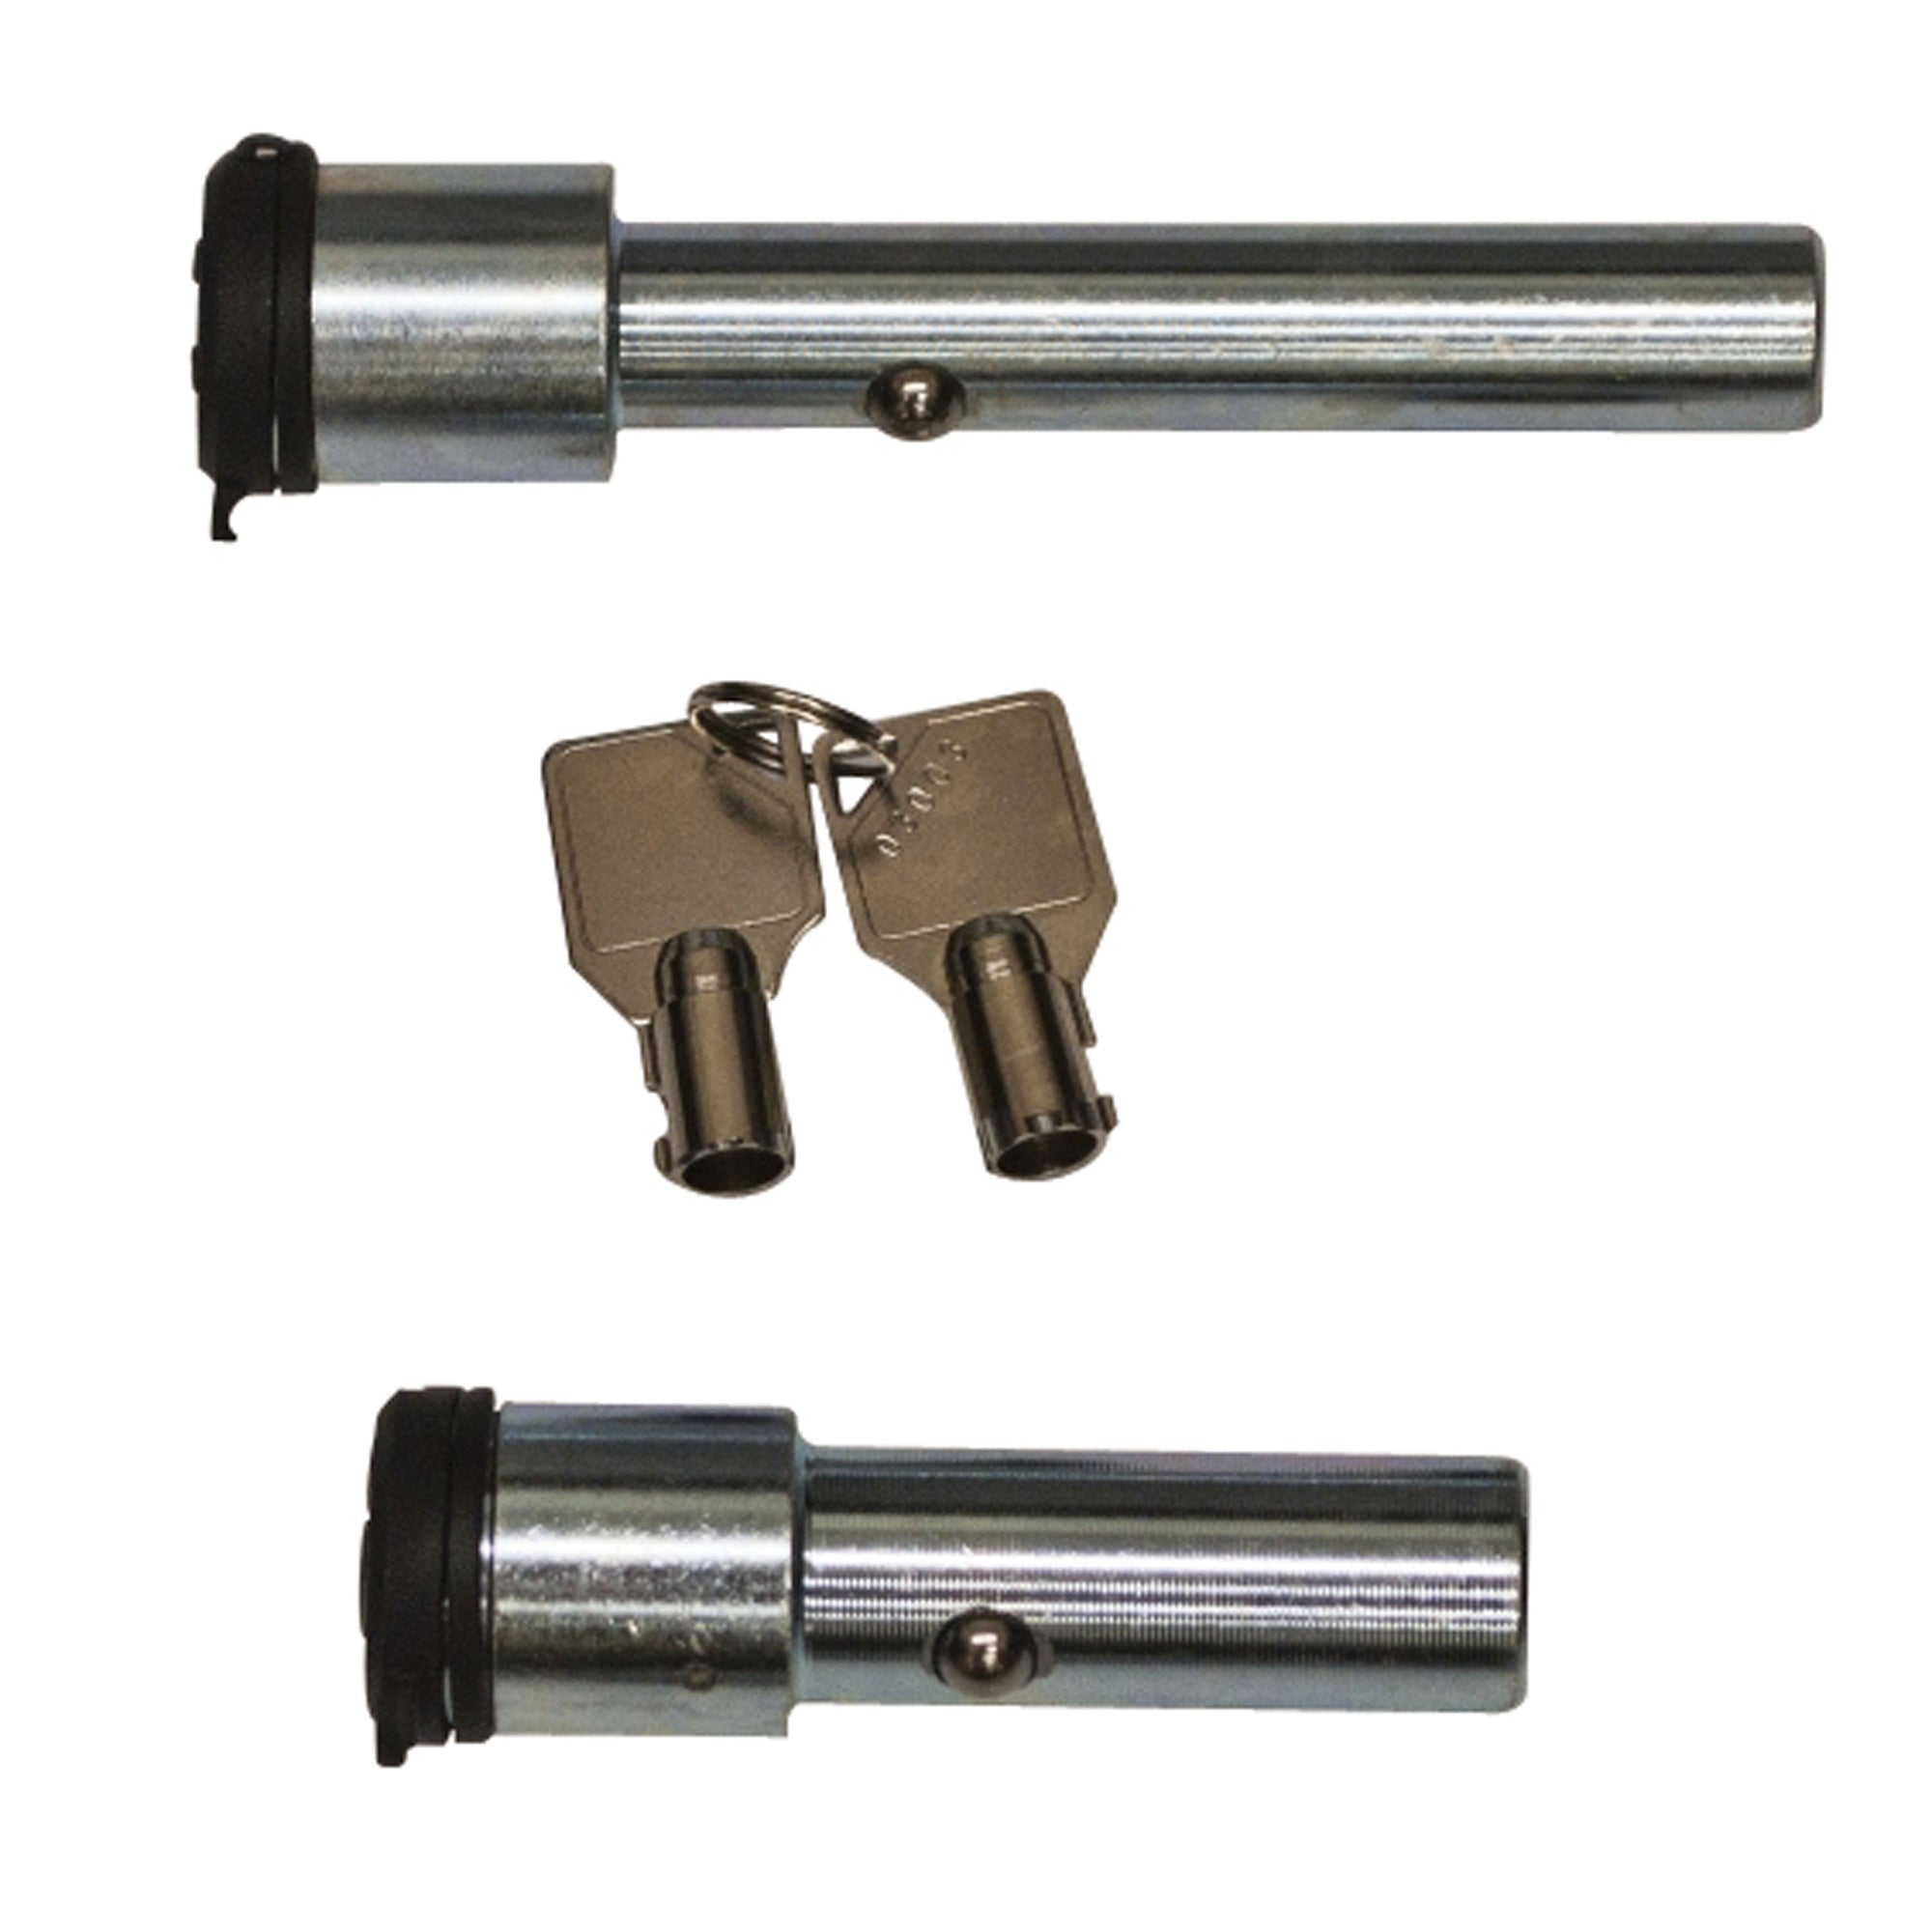 Andersen Hitches 3493 EZ/EZ HD Hitch Stainless Steel Lock Pin for 2" and 2-1/2" Receivers